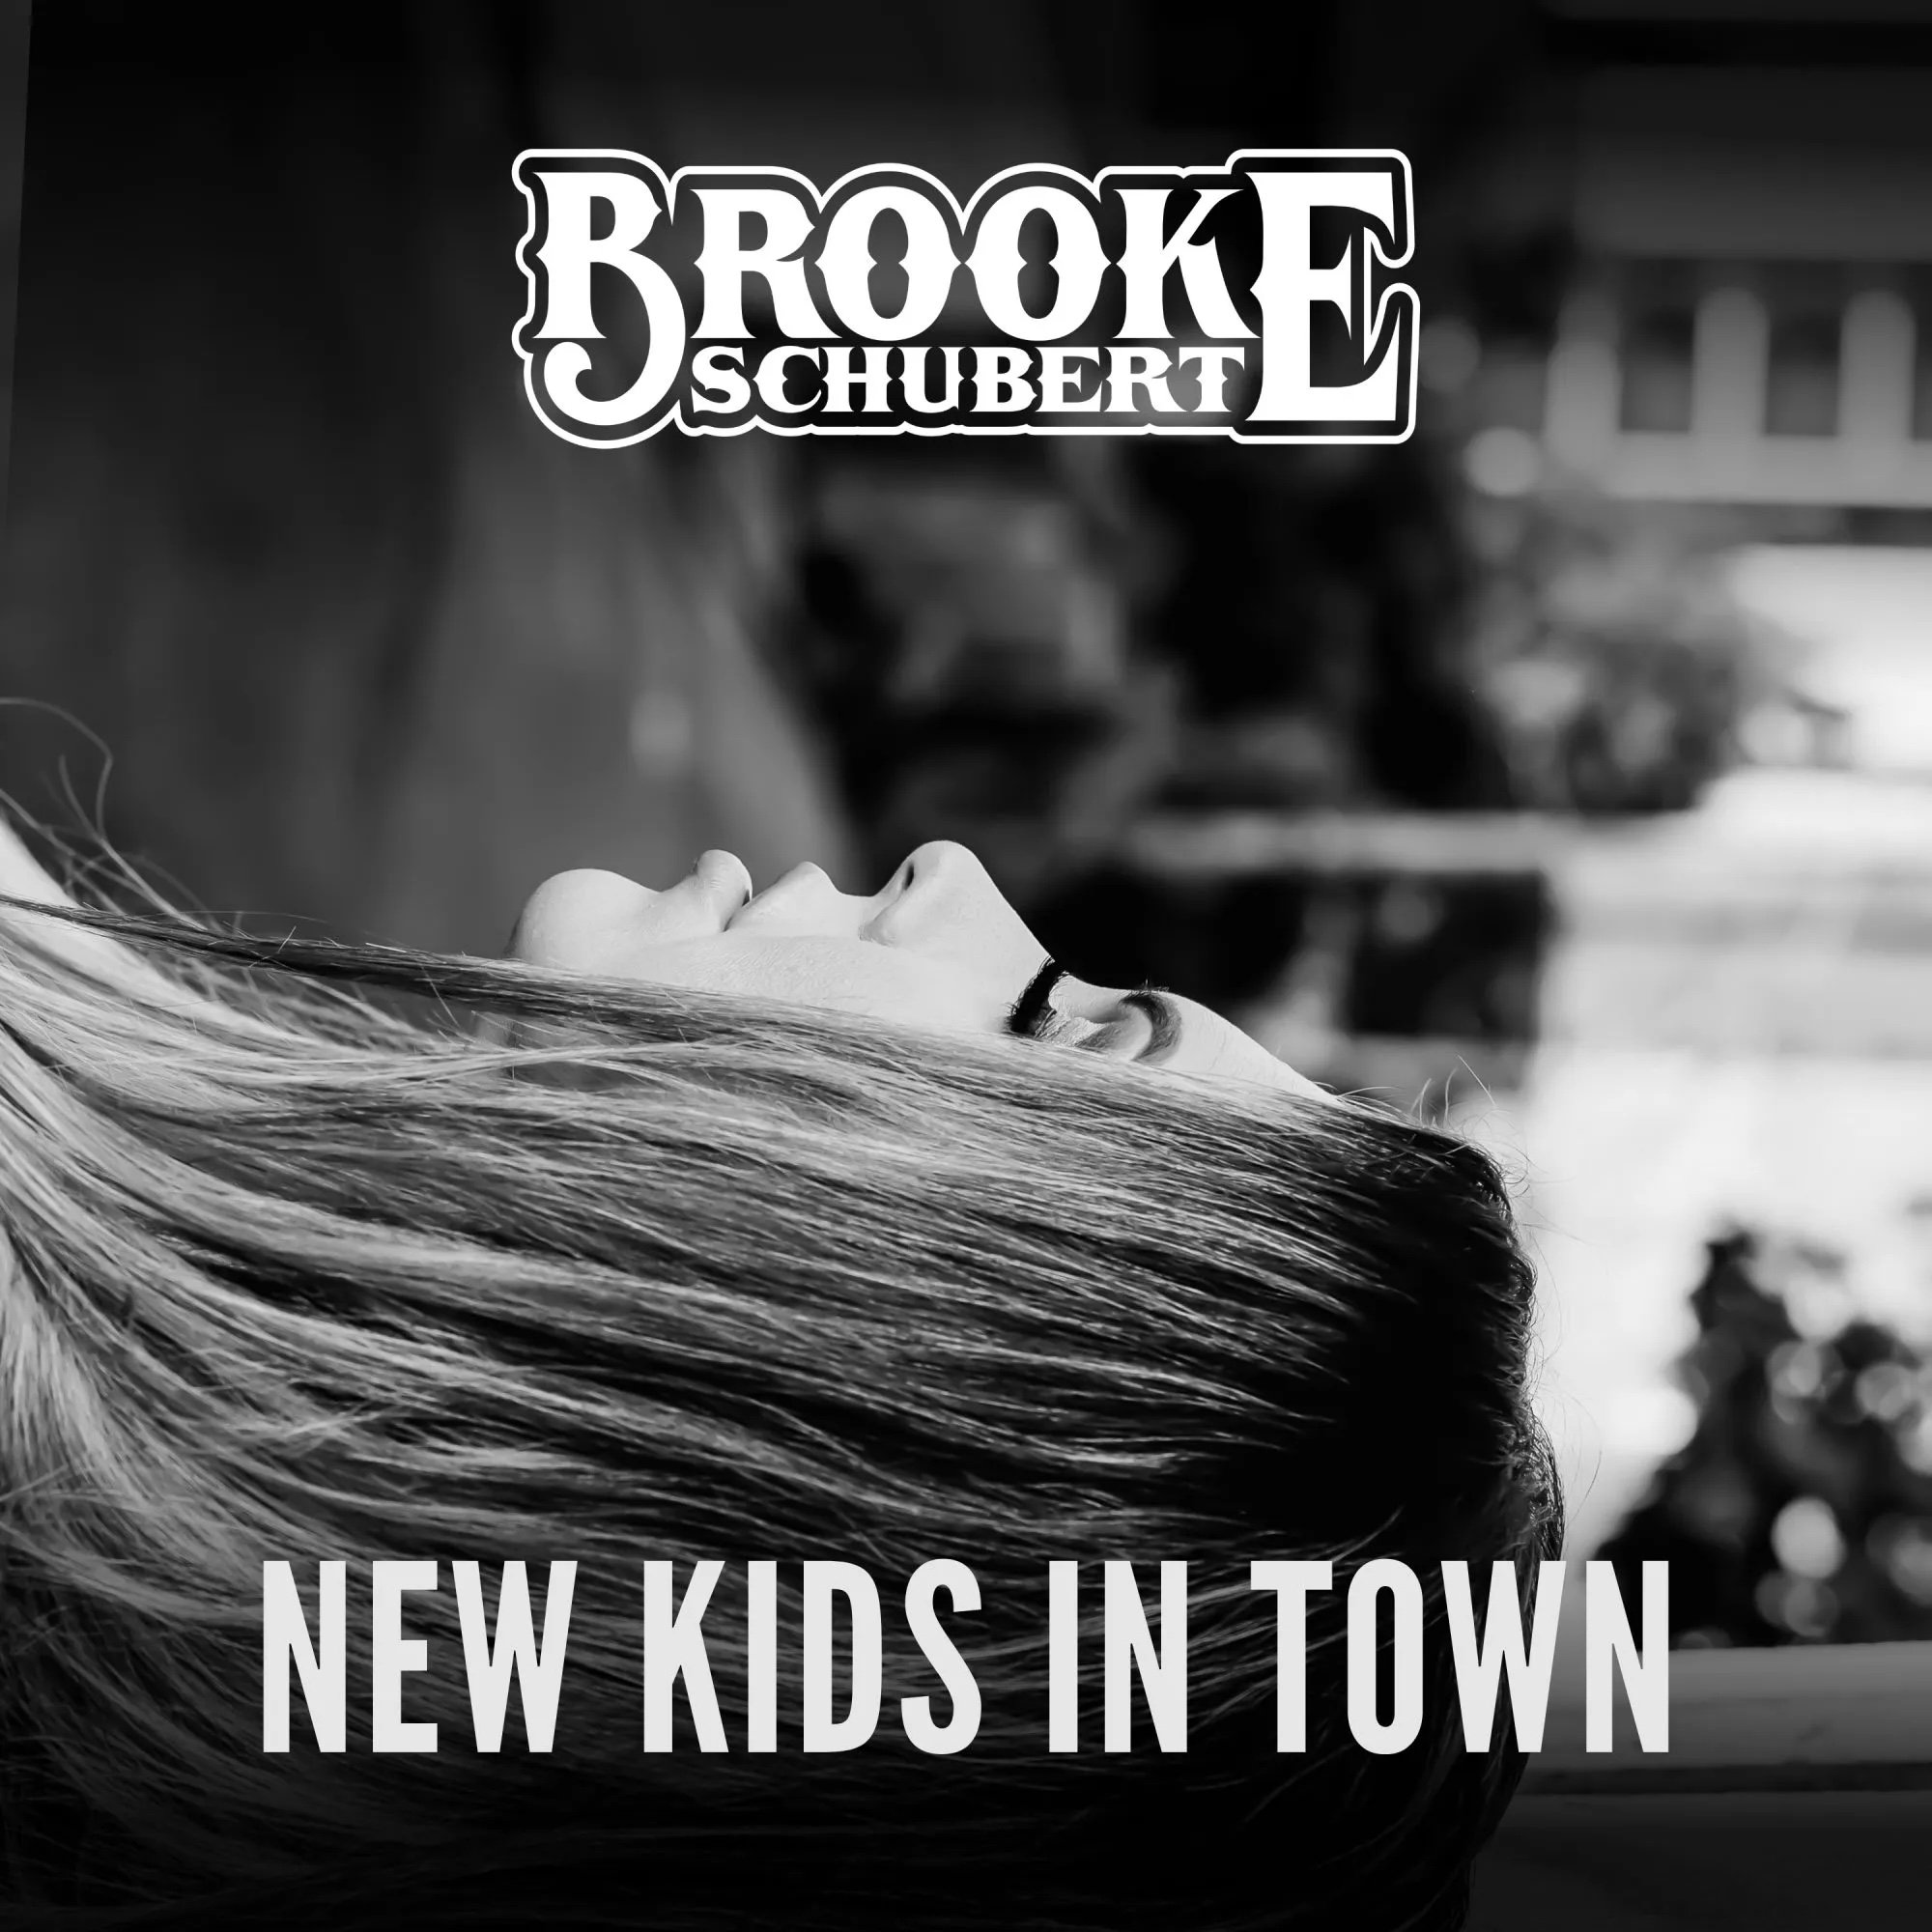 New-Kids-In-Town-Brooke-Schubert-Cover-scaled.jpg